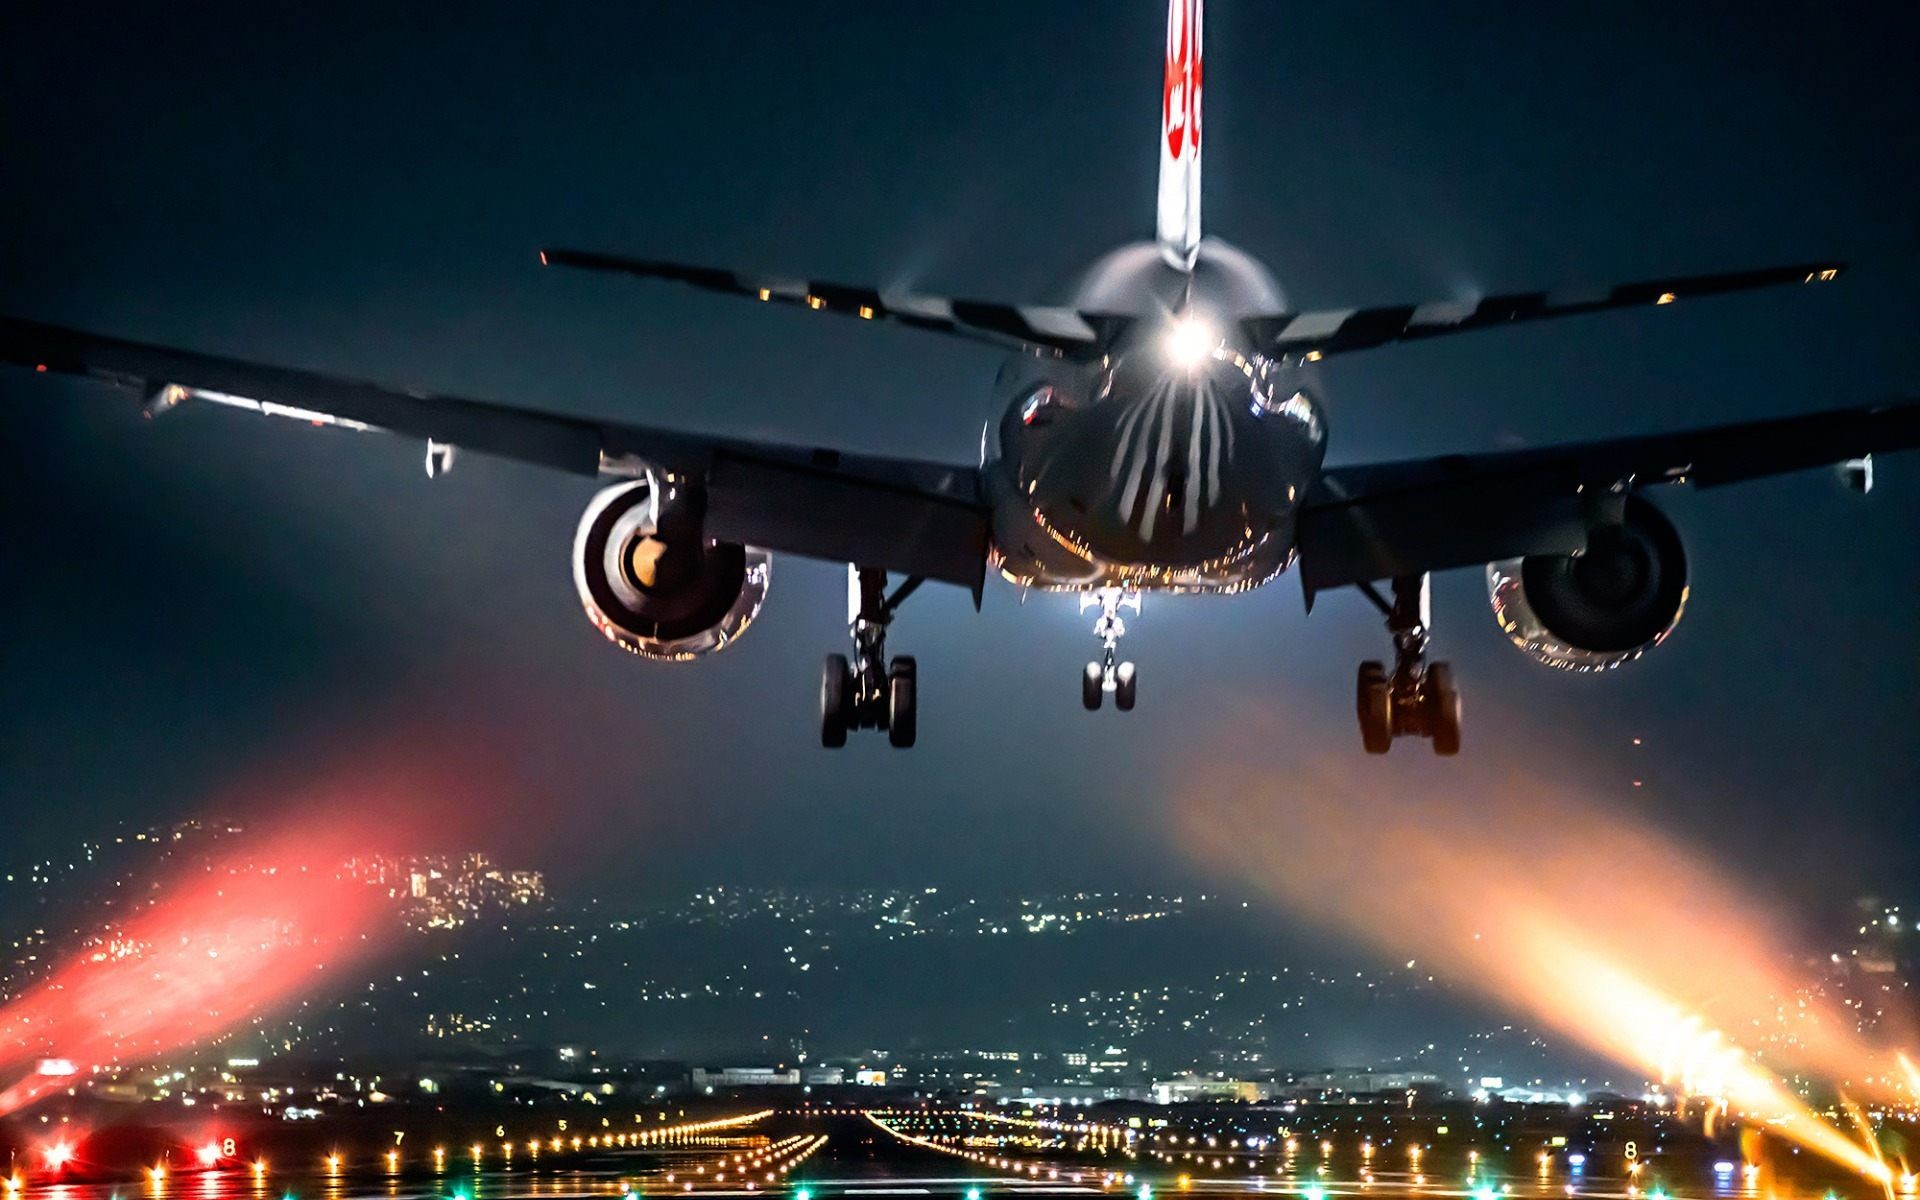 42 Airplane Wallpapers Data-src /w/full/d/8/8/501152 - Airplane Take Off  Night - 1920x1200 Wallpaper 